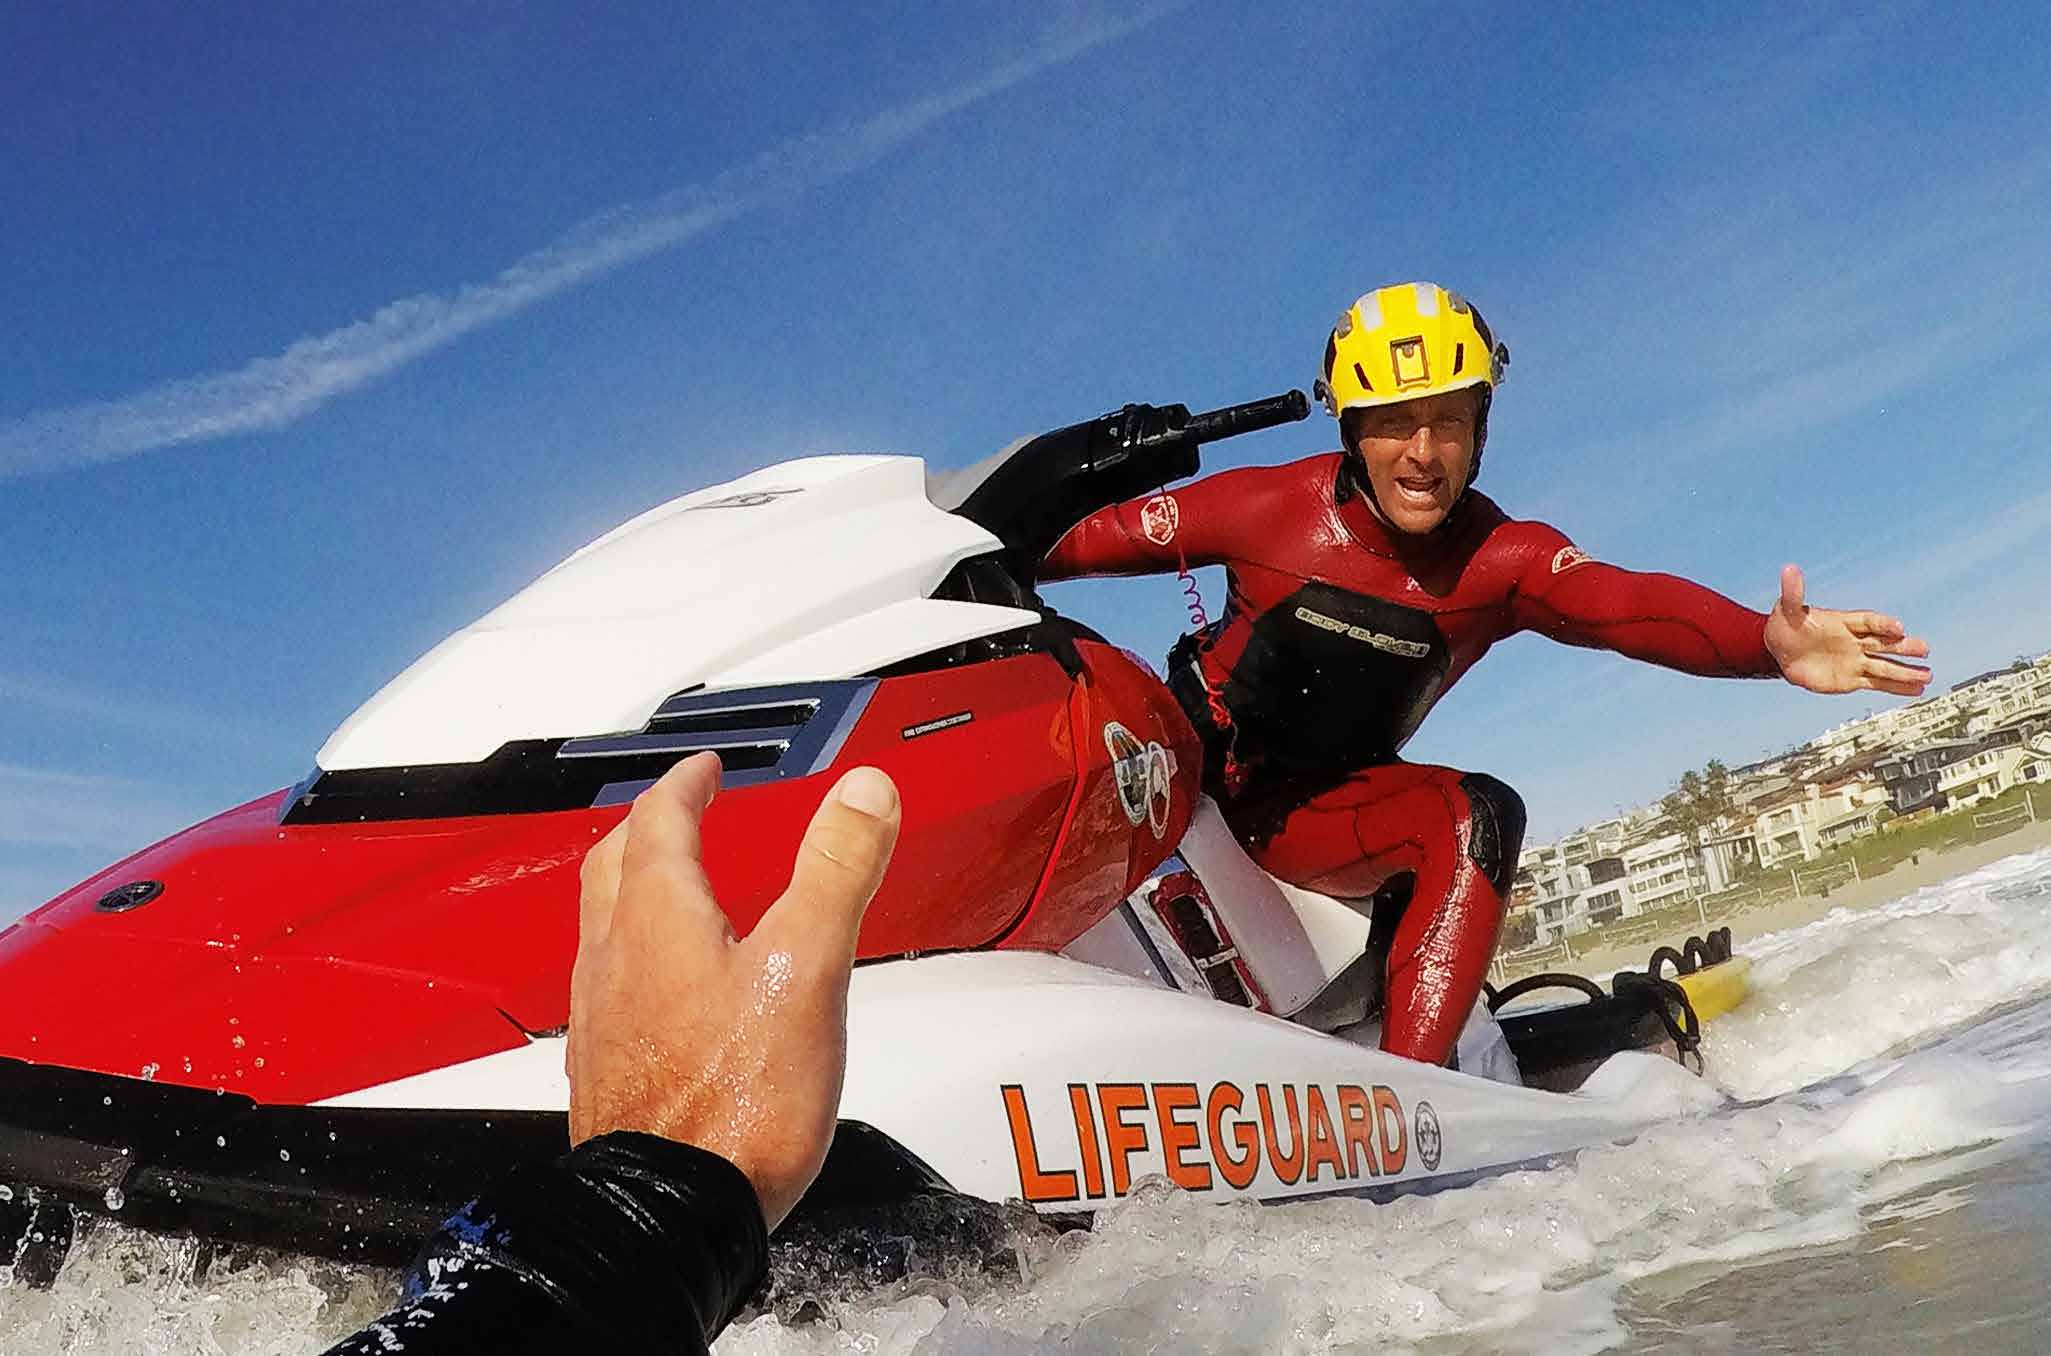 Lifeguard helping a swimmer in the water while riding a jetski.